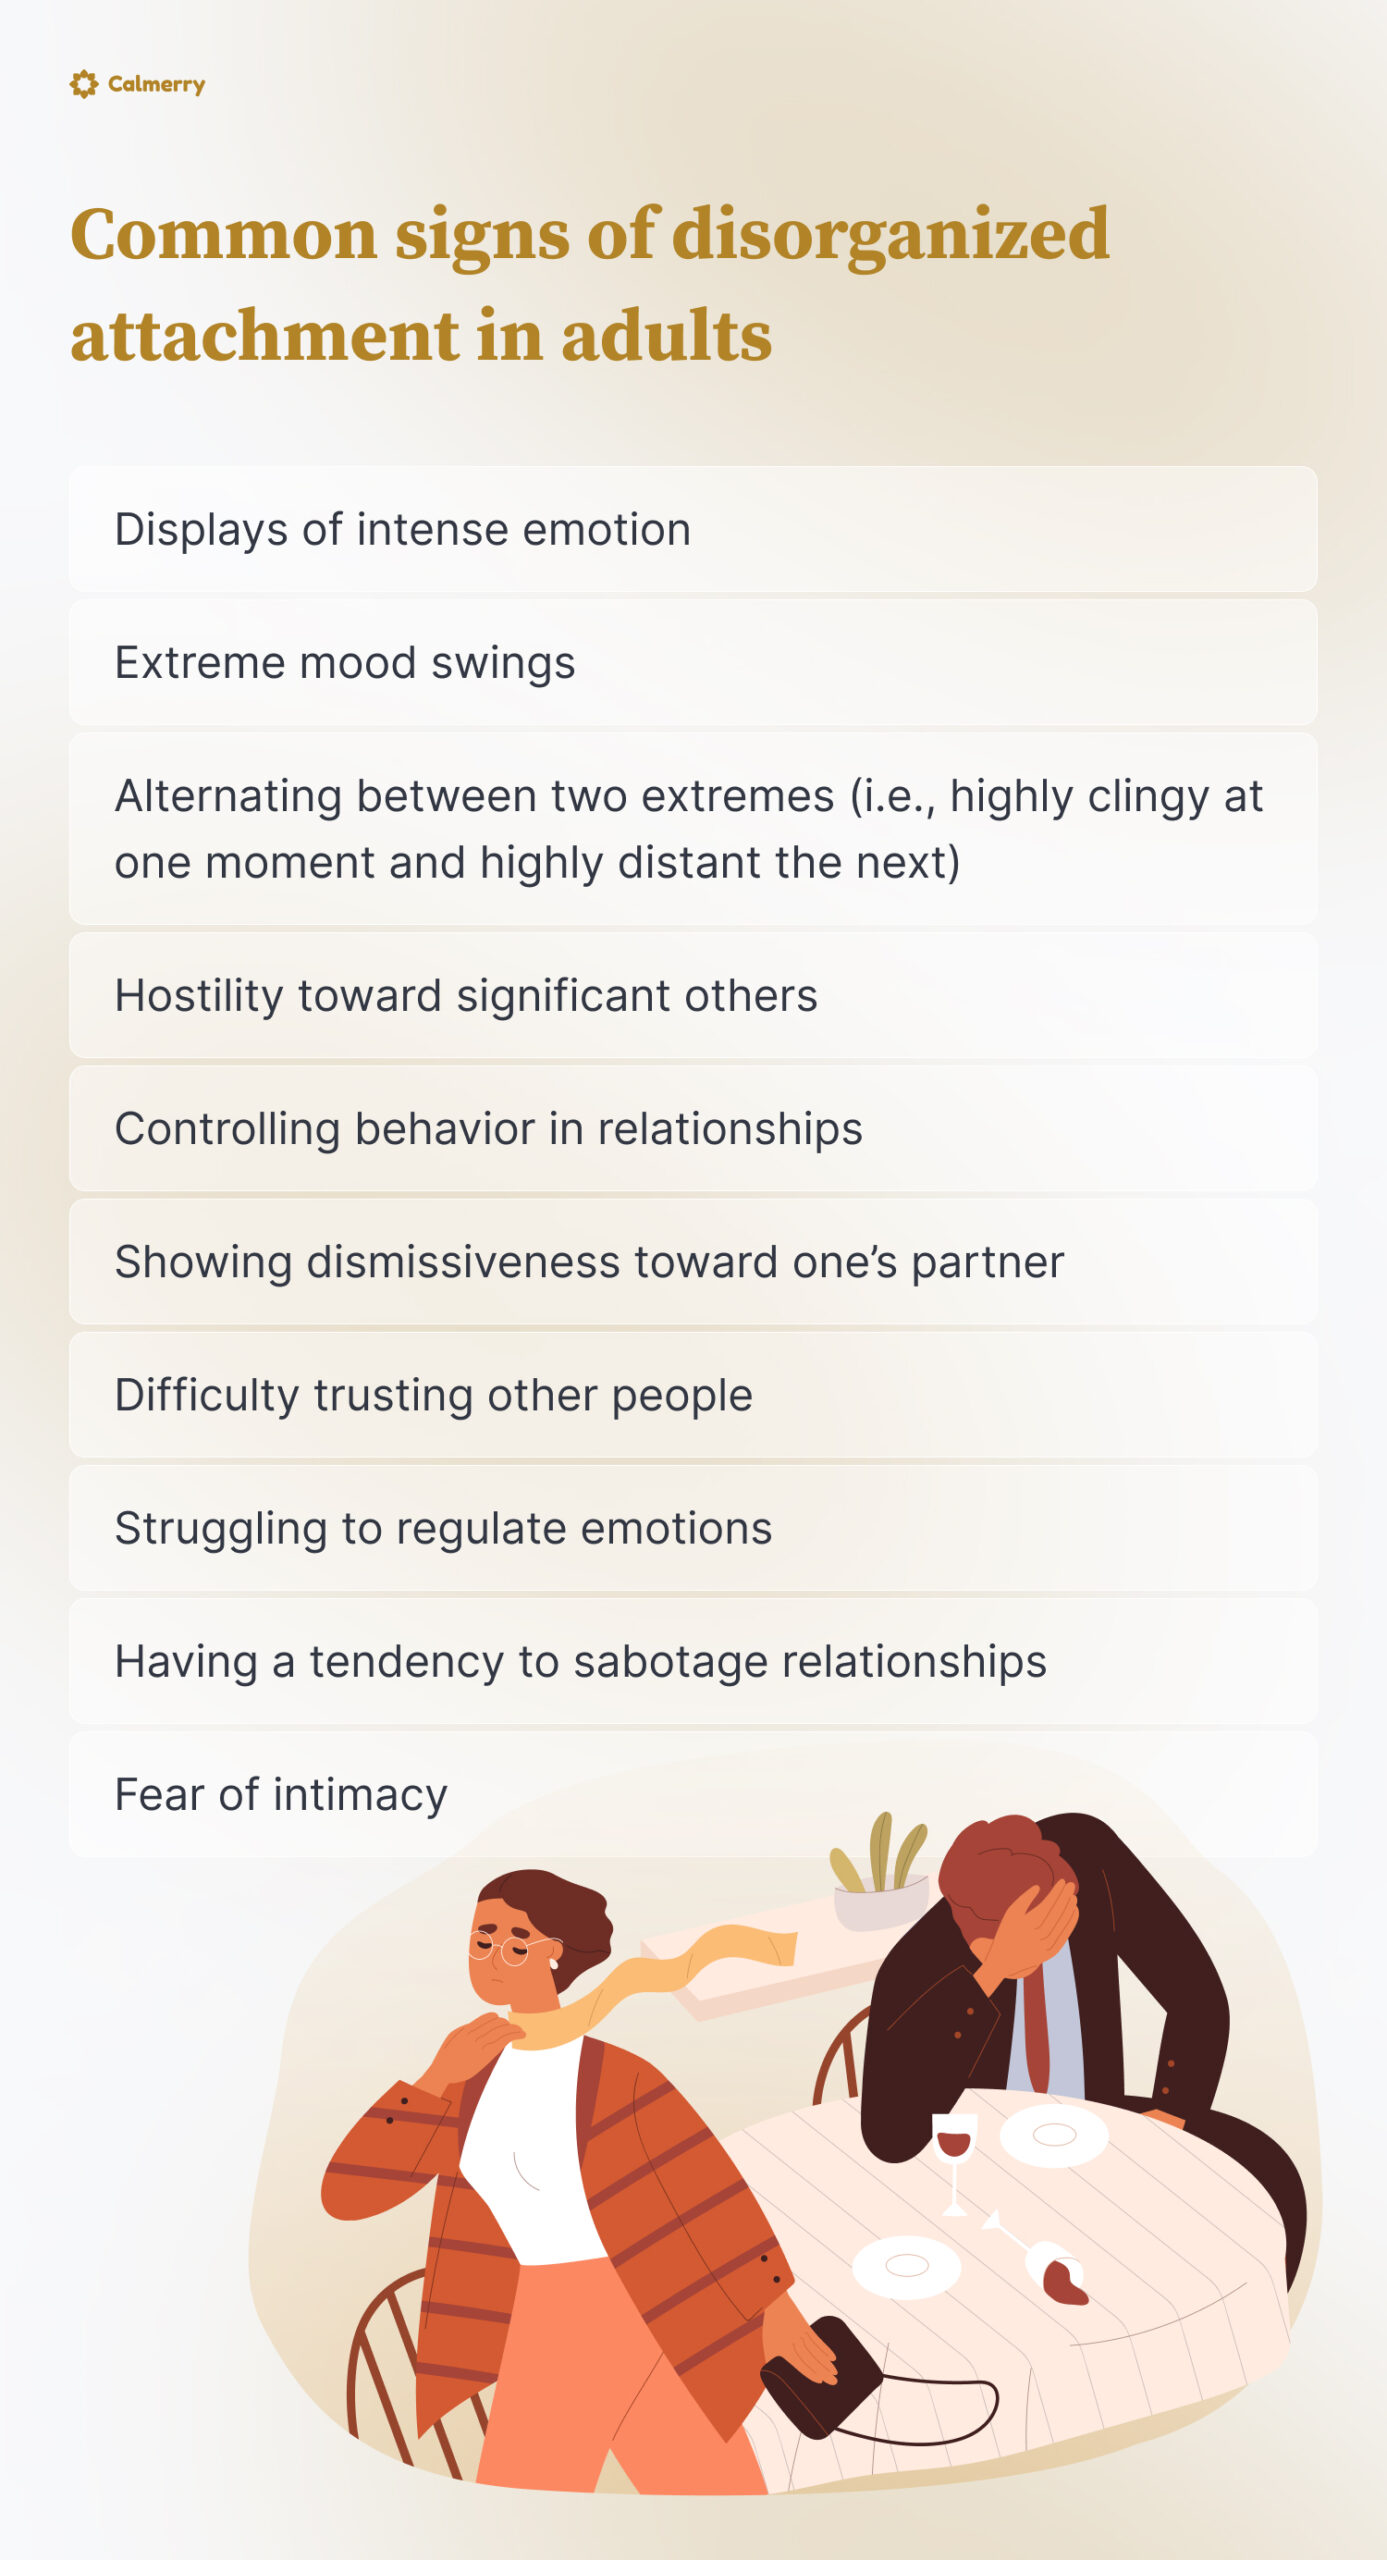 Сommon signs of disorganized attachment in adults
Displays of intense emotion
Extreme mood swings
Alternating between two extremes (i.e., highly clingy at one moment and highly distant the next)
Hostility toward significant others
Controlling behavior in relationships
Showing dismissiveness toward one’s partner 
Difficulty trusting other people
Struggling to regulate emotions 
Having a tendency to sabotage relationships
Fear of intimacy 